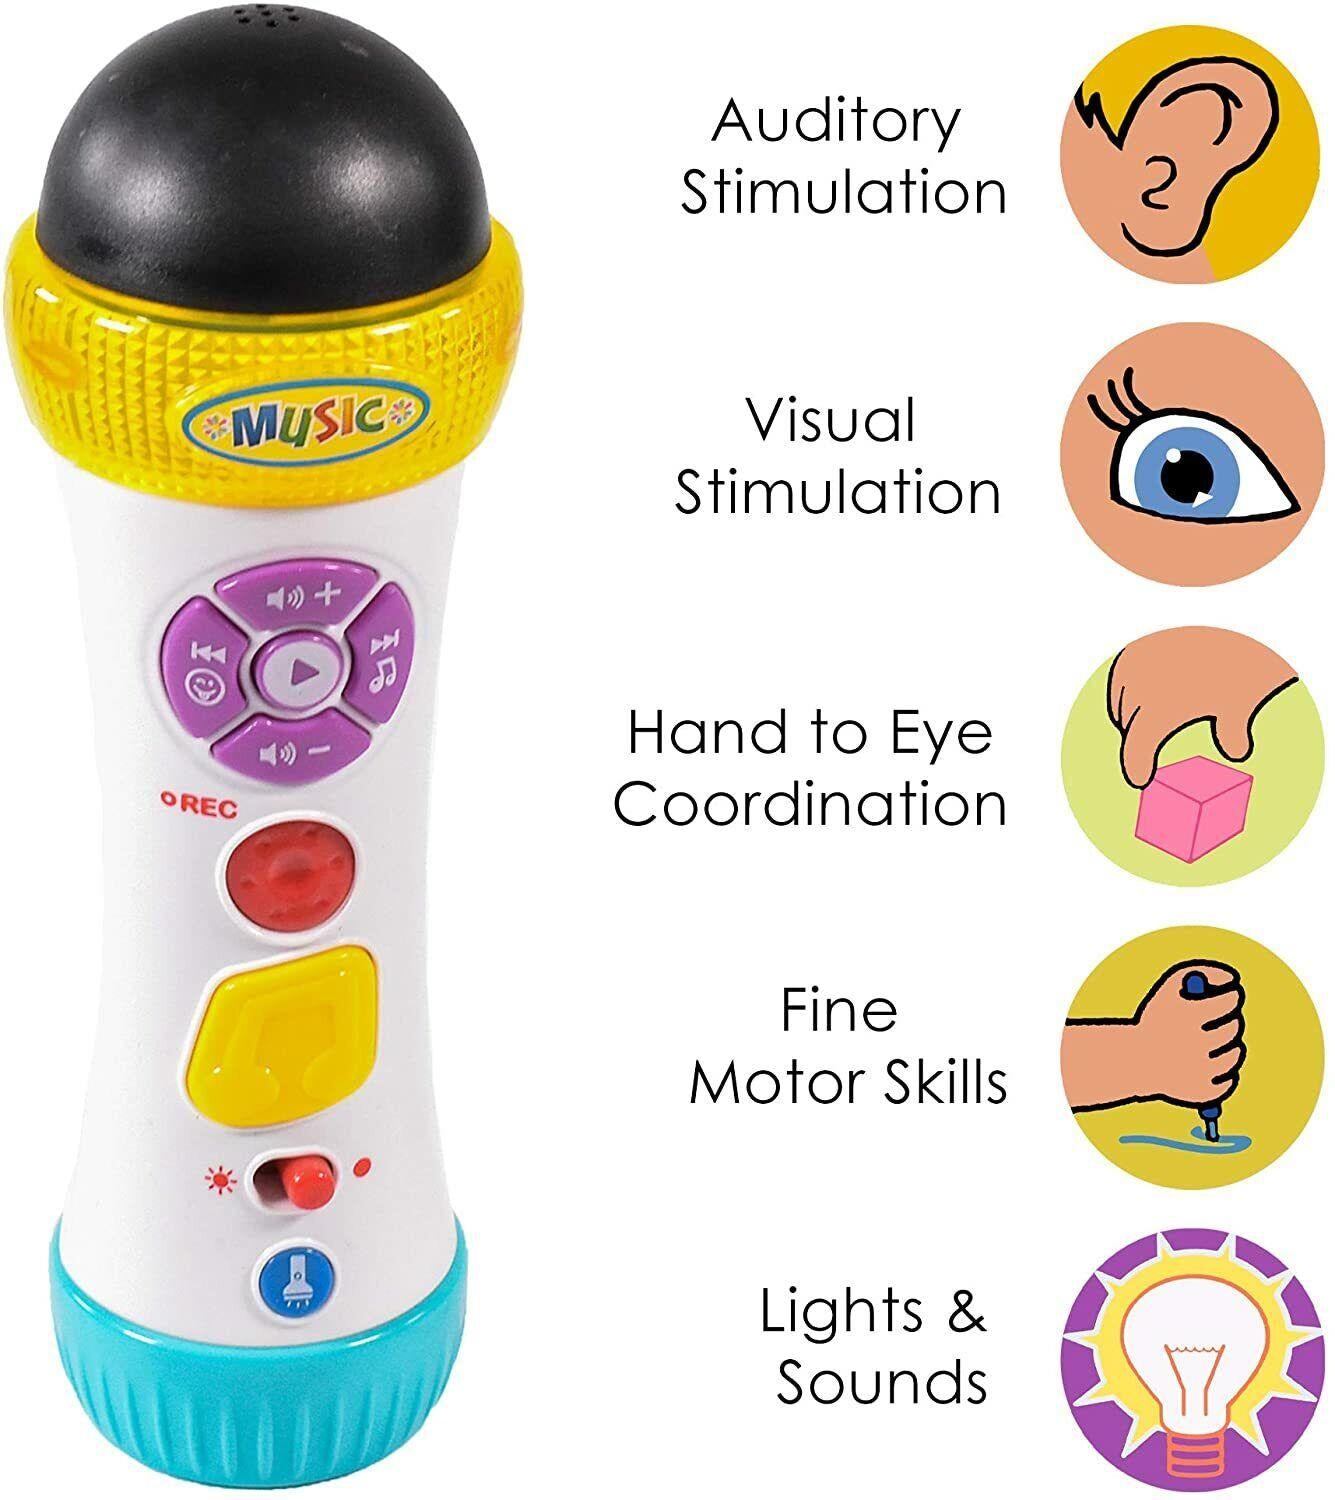 Musical Recording Microphone Baby Toy by The Magic Toy Shop - UKBuyZone